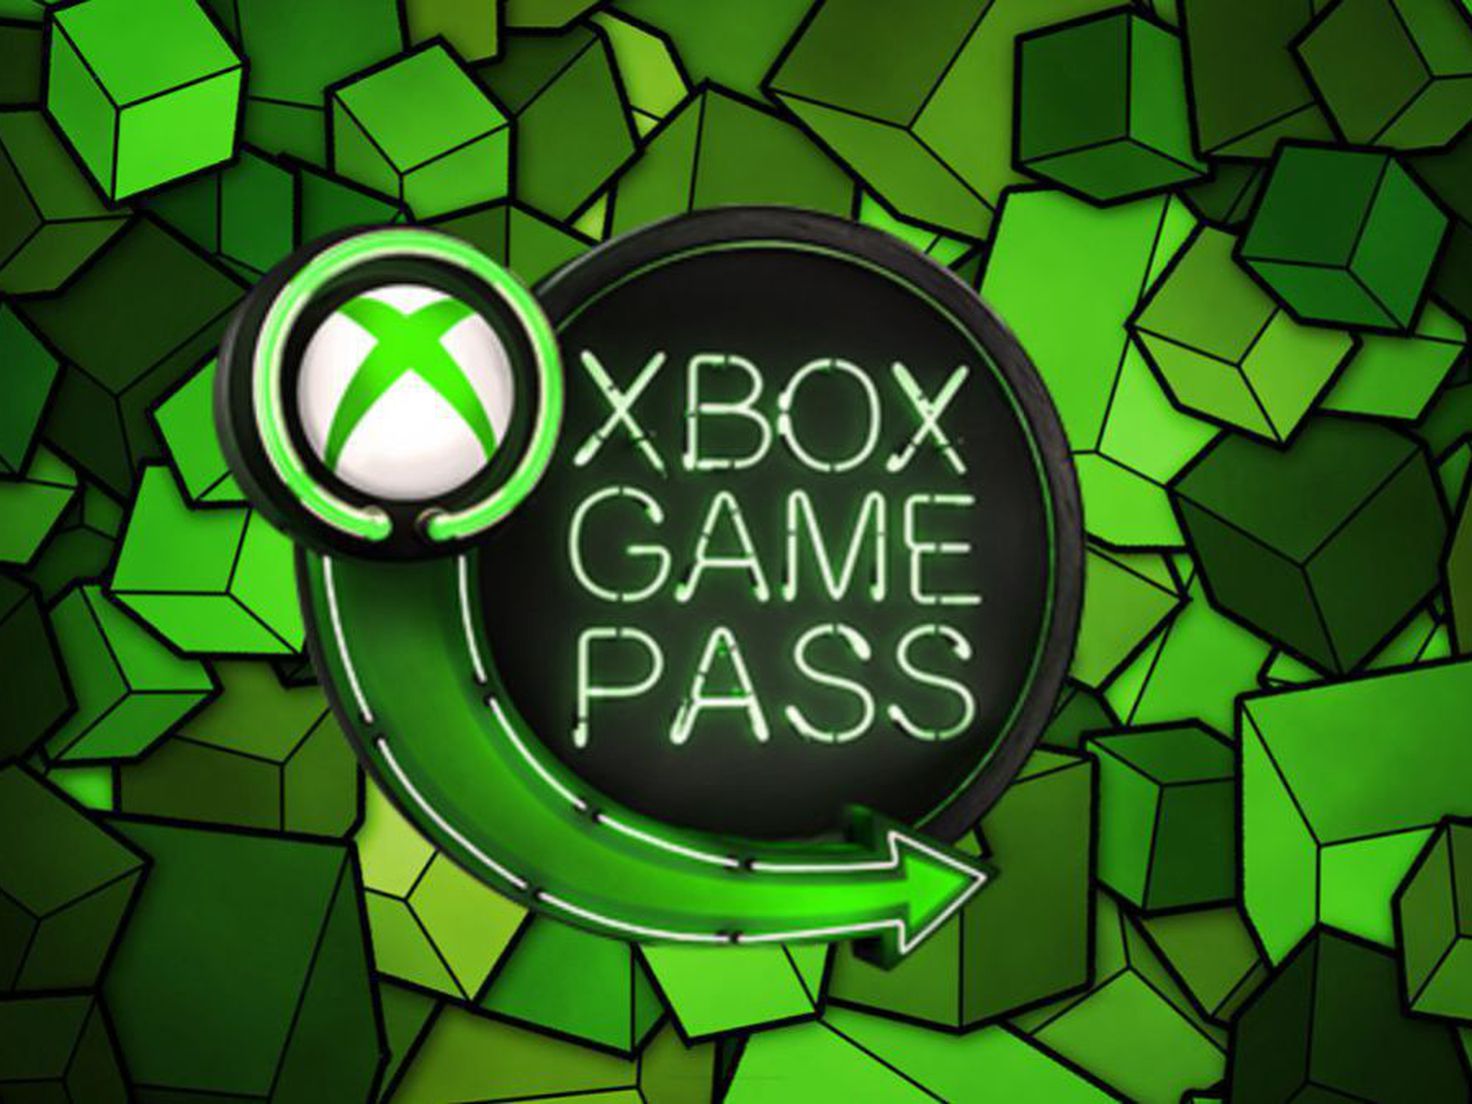 12 Months Xbox Game Pass Ultimate | Console + PC | Live + Game Pass (USA  Region)